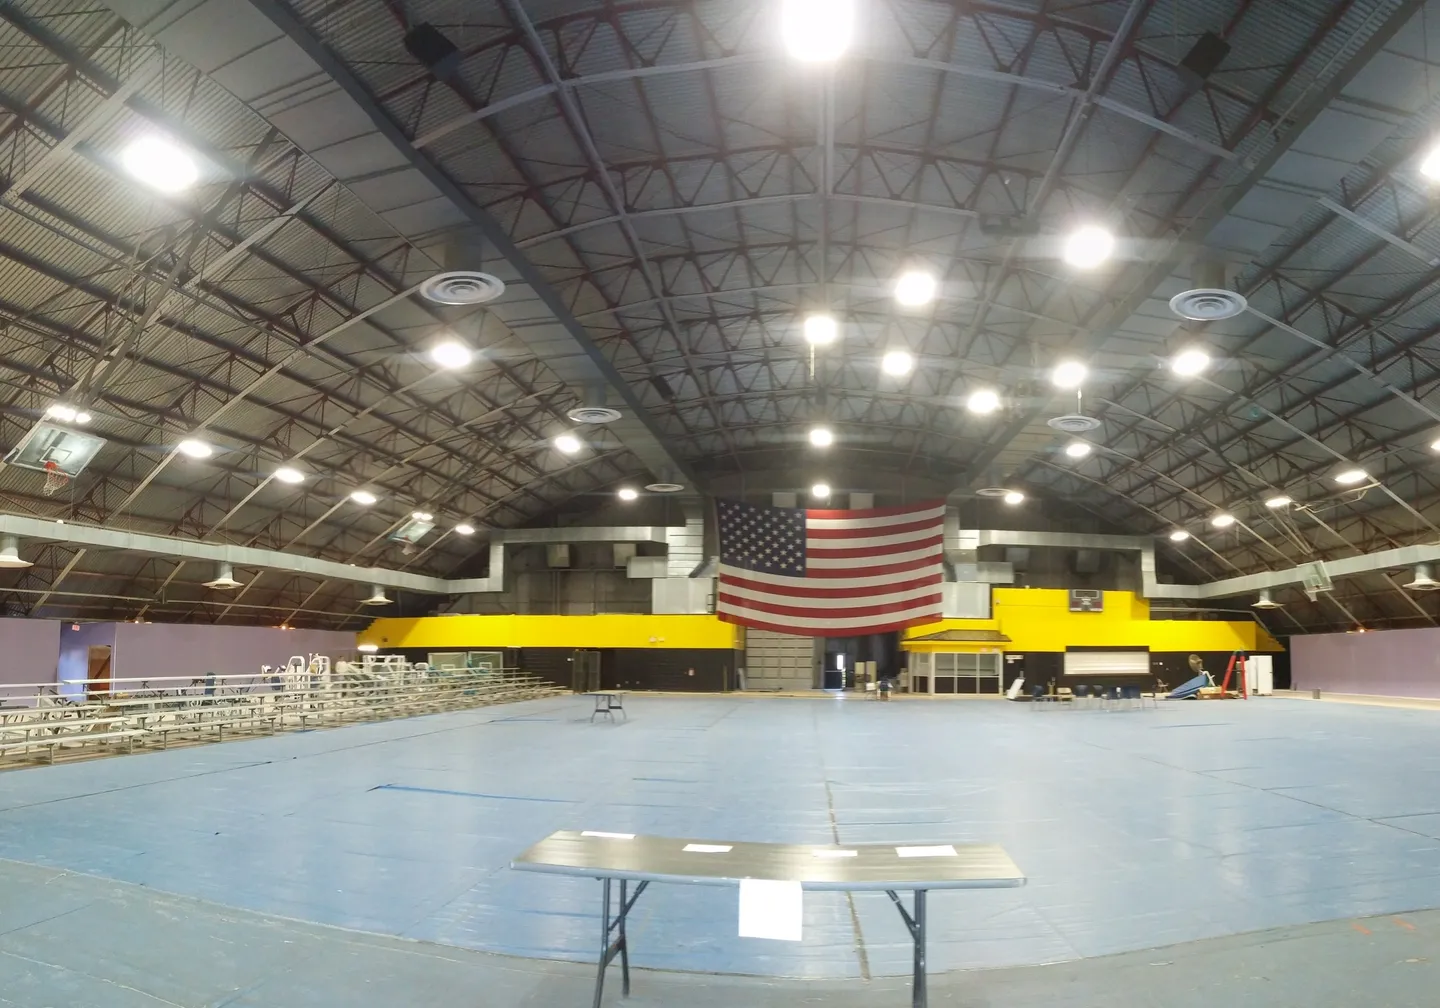 A large indoor arena with tables and american flag.